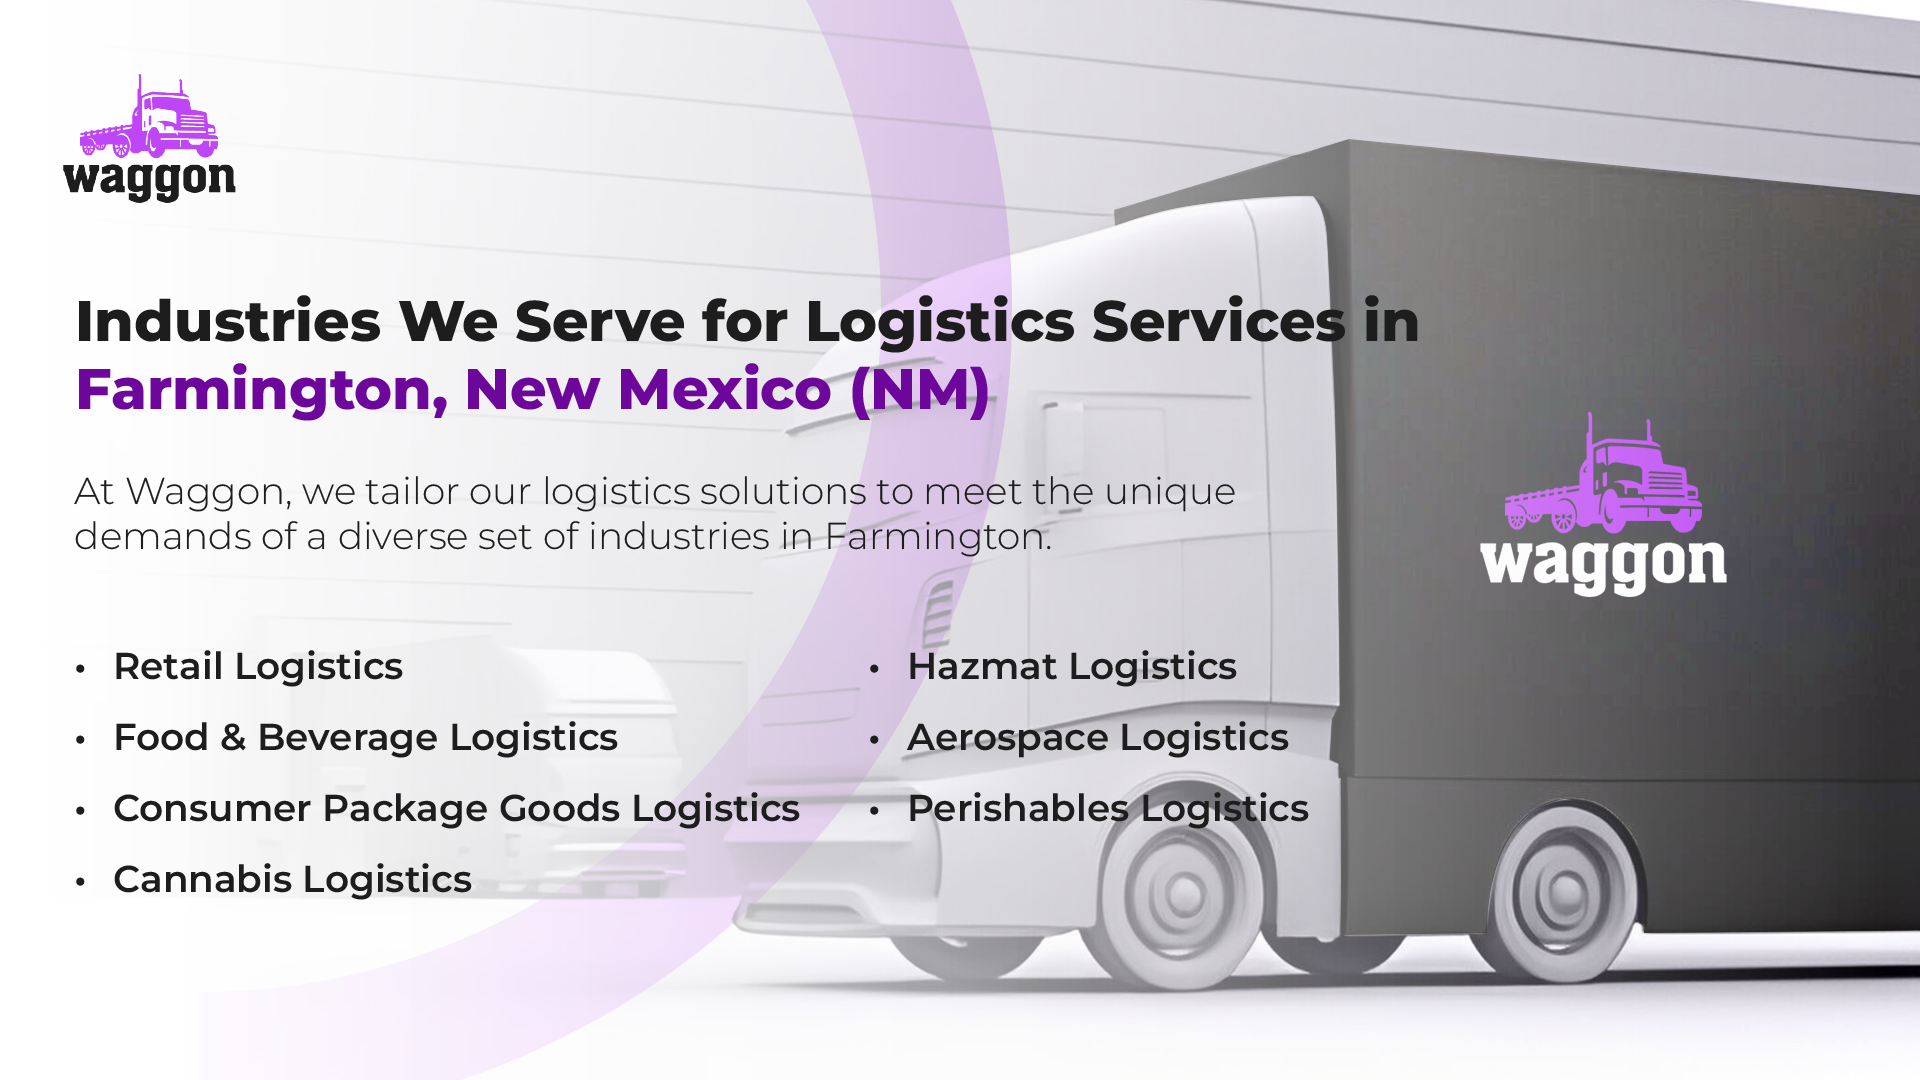 Industries We Serve for Logistics Services in Farmington, New Mexico (NM)